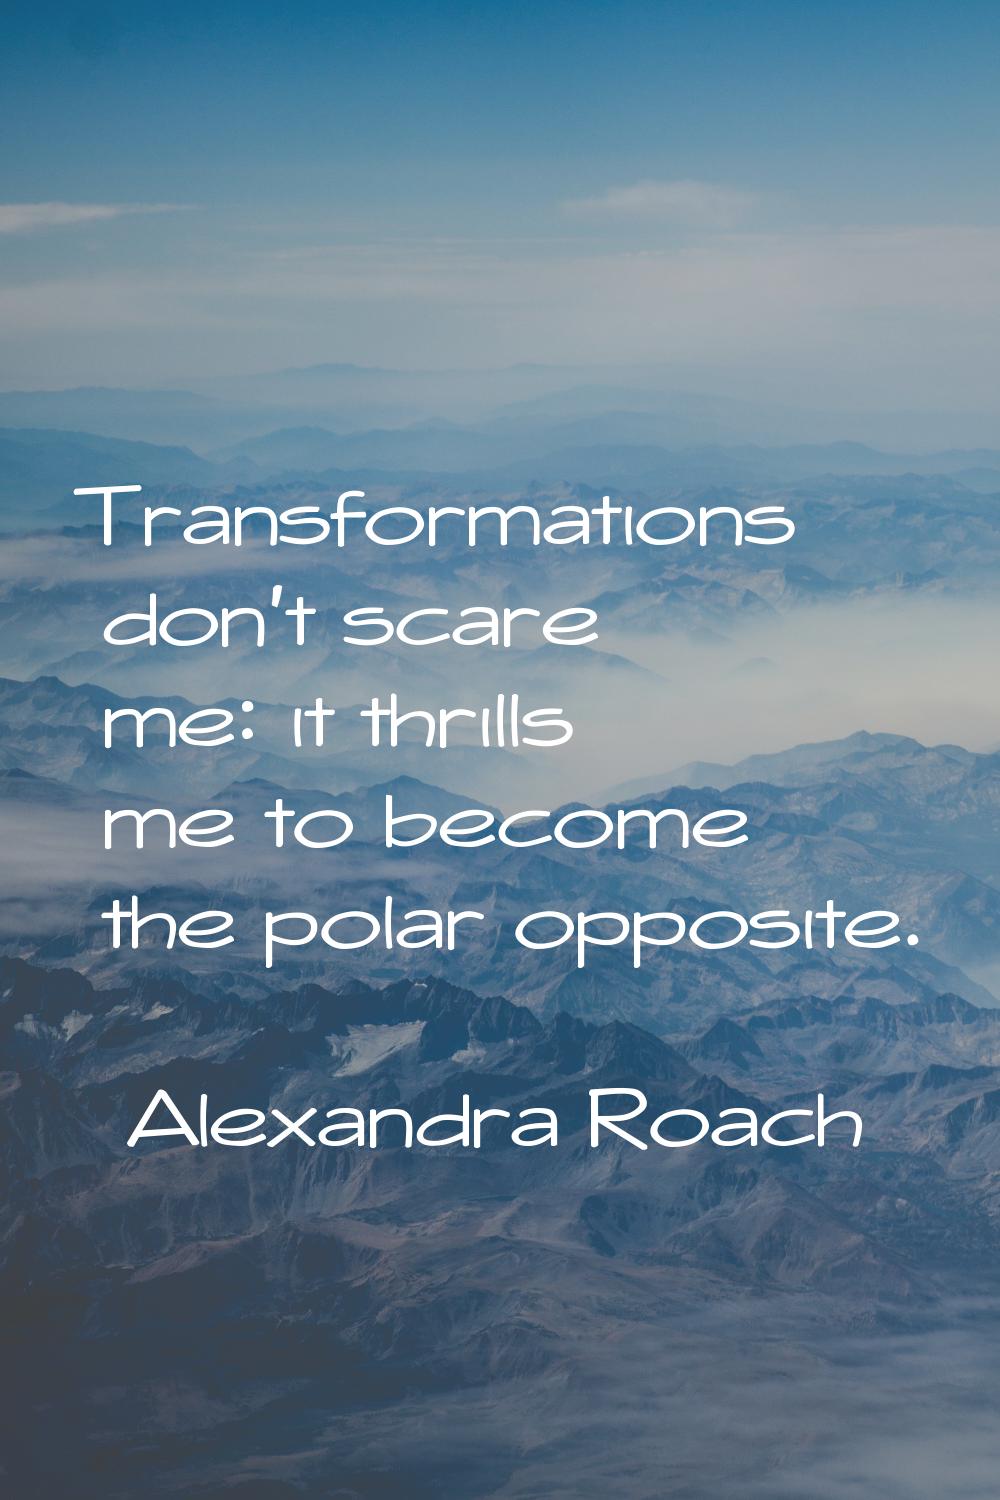 Transformations don't scare me: it thrills me to become the polar opposite.